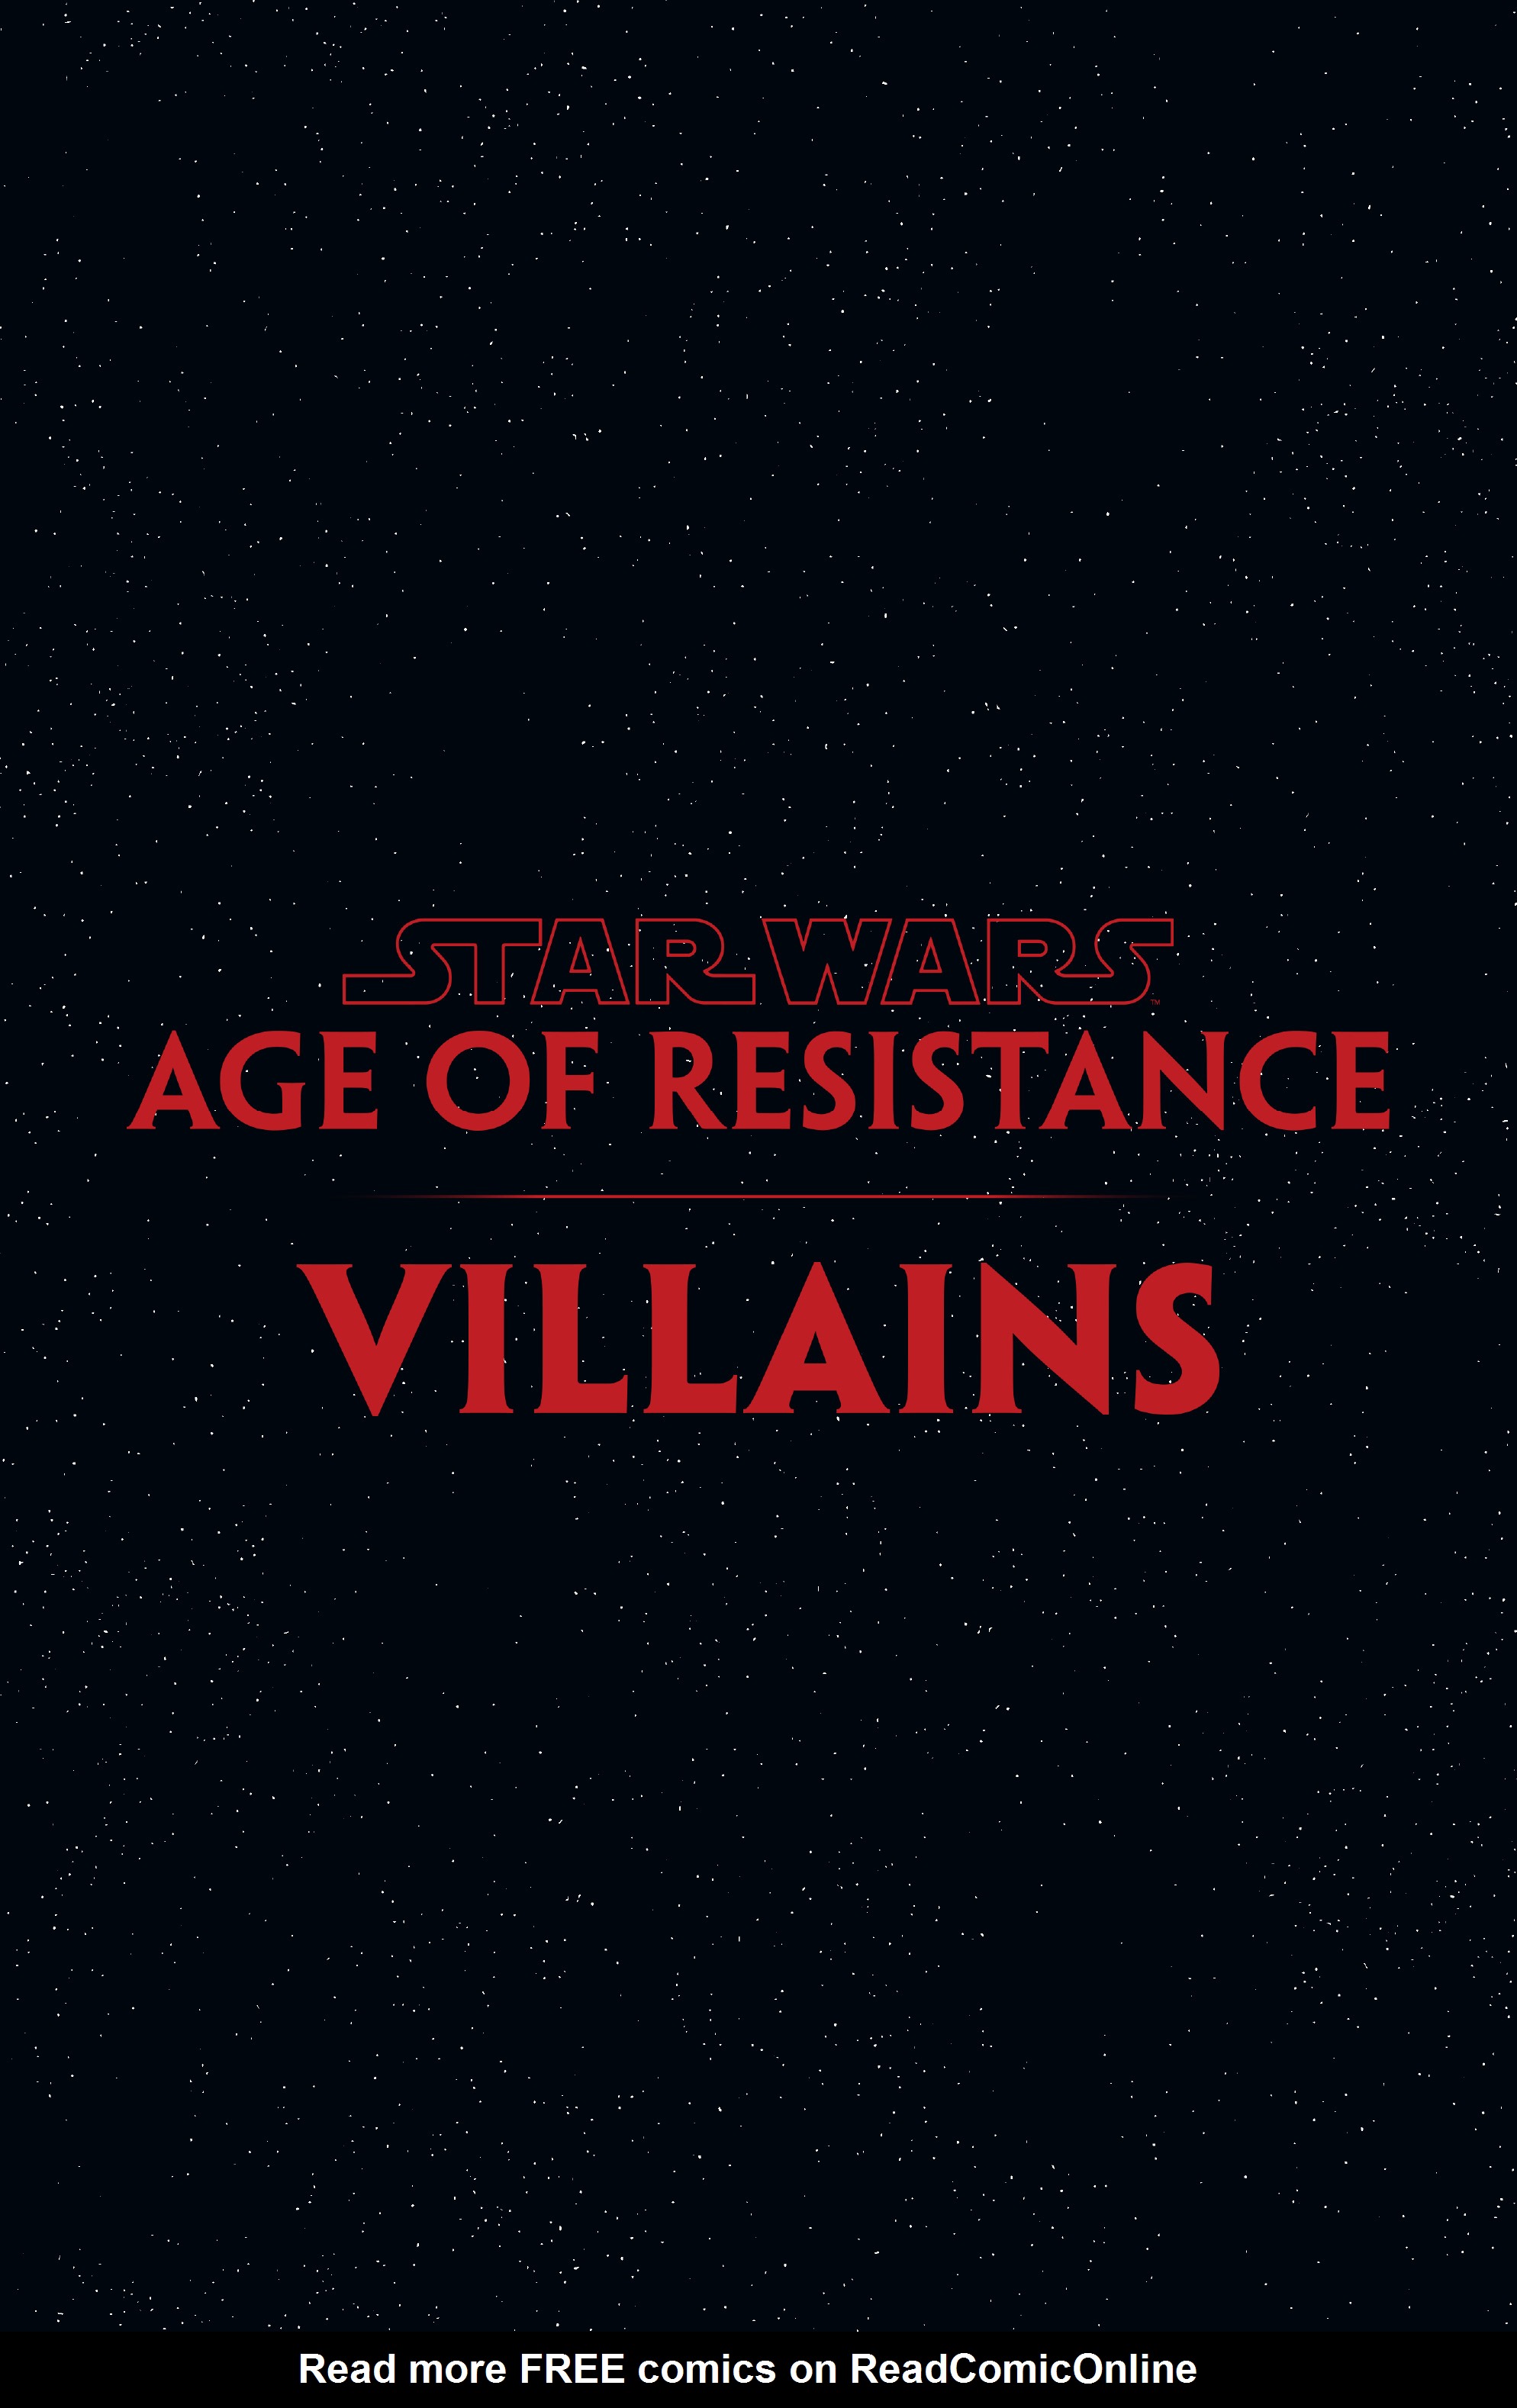 Read online Star Wars: Age of Resistance - Villains comic -  Issue # TPB - 2